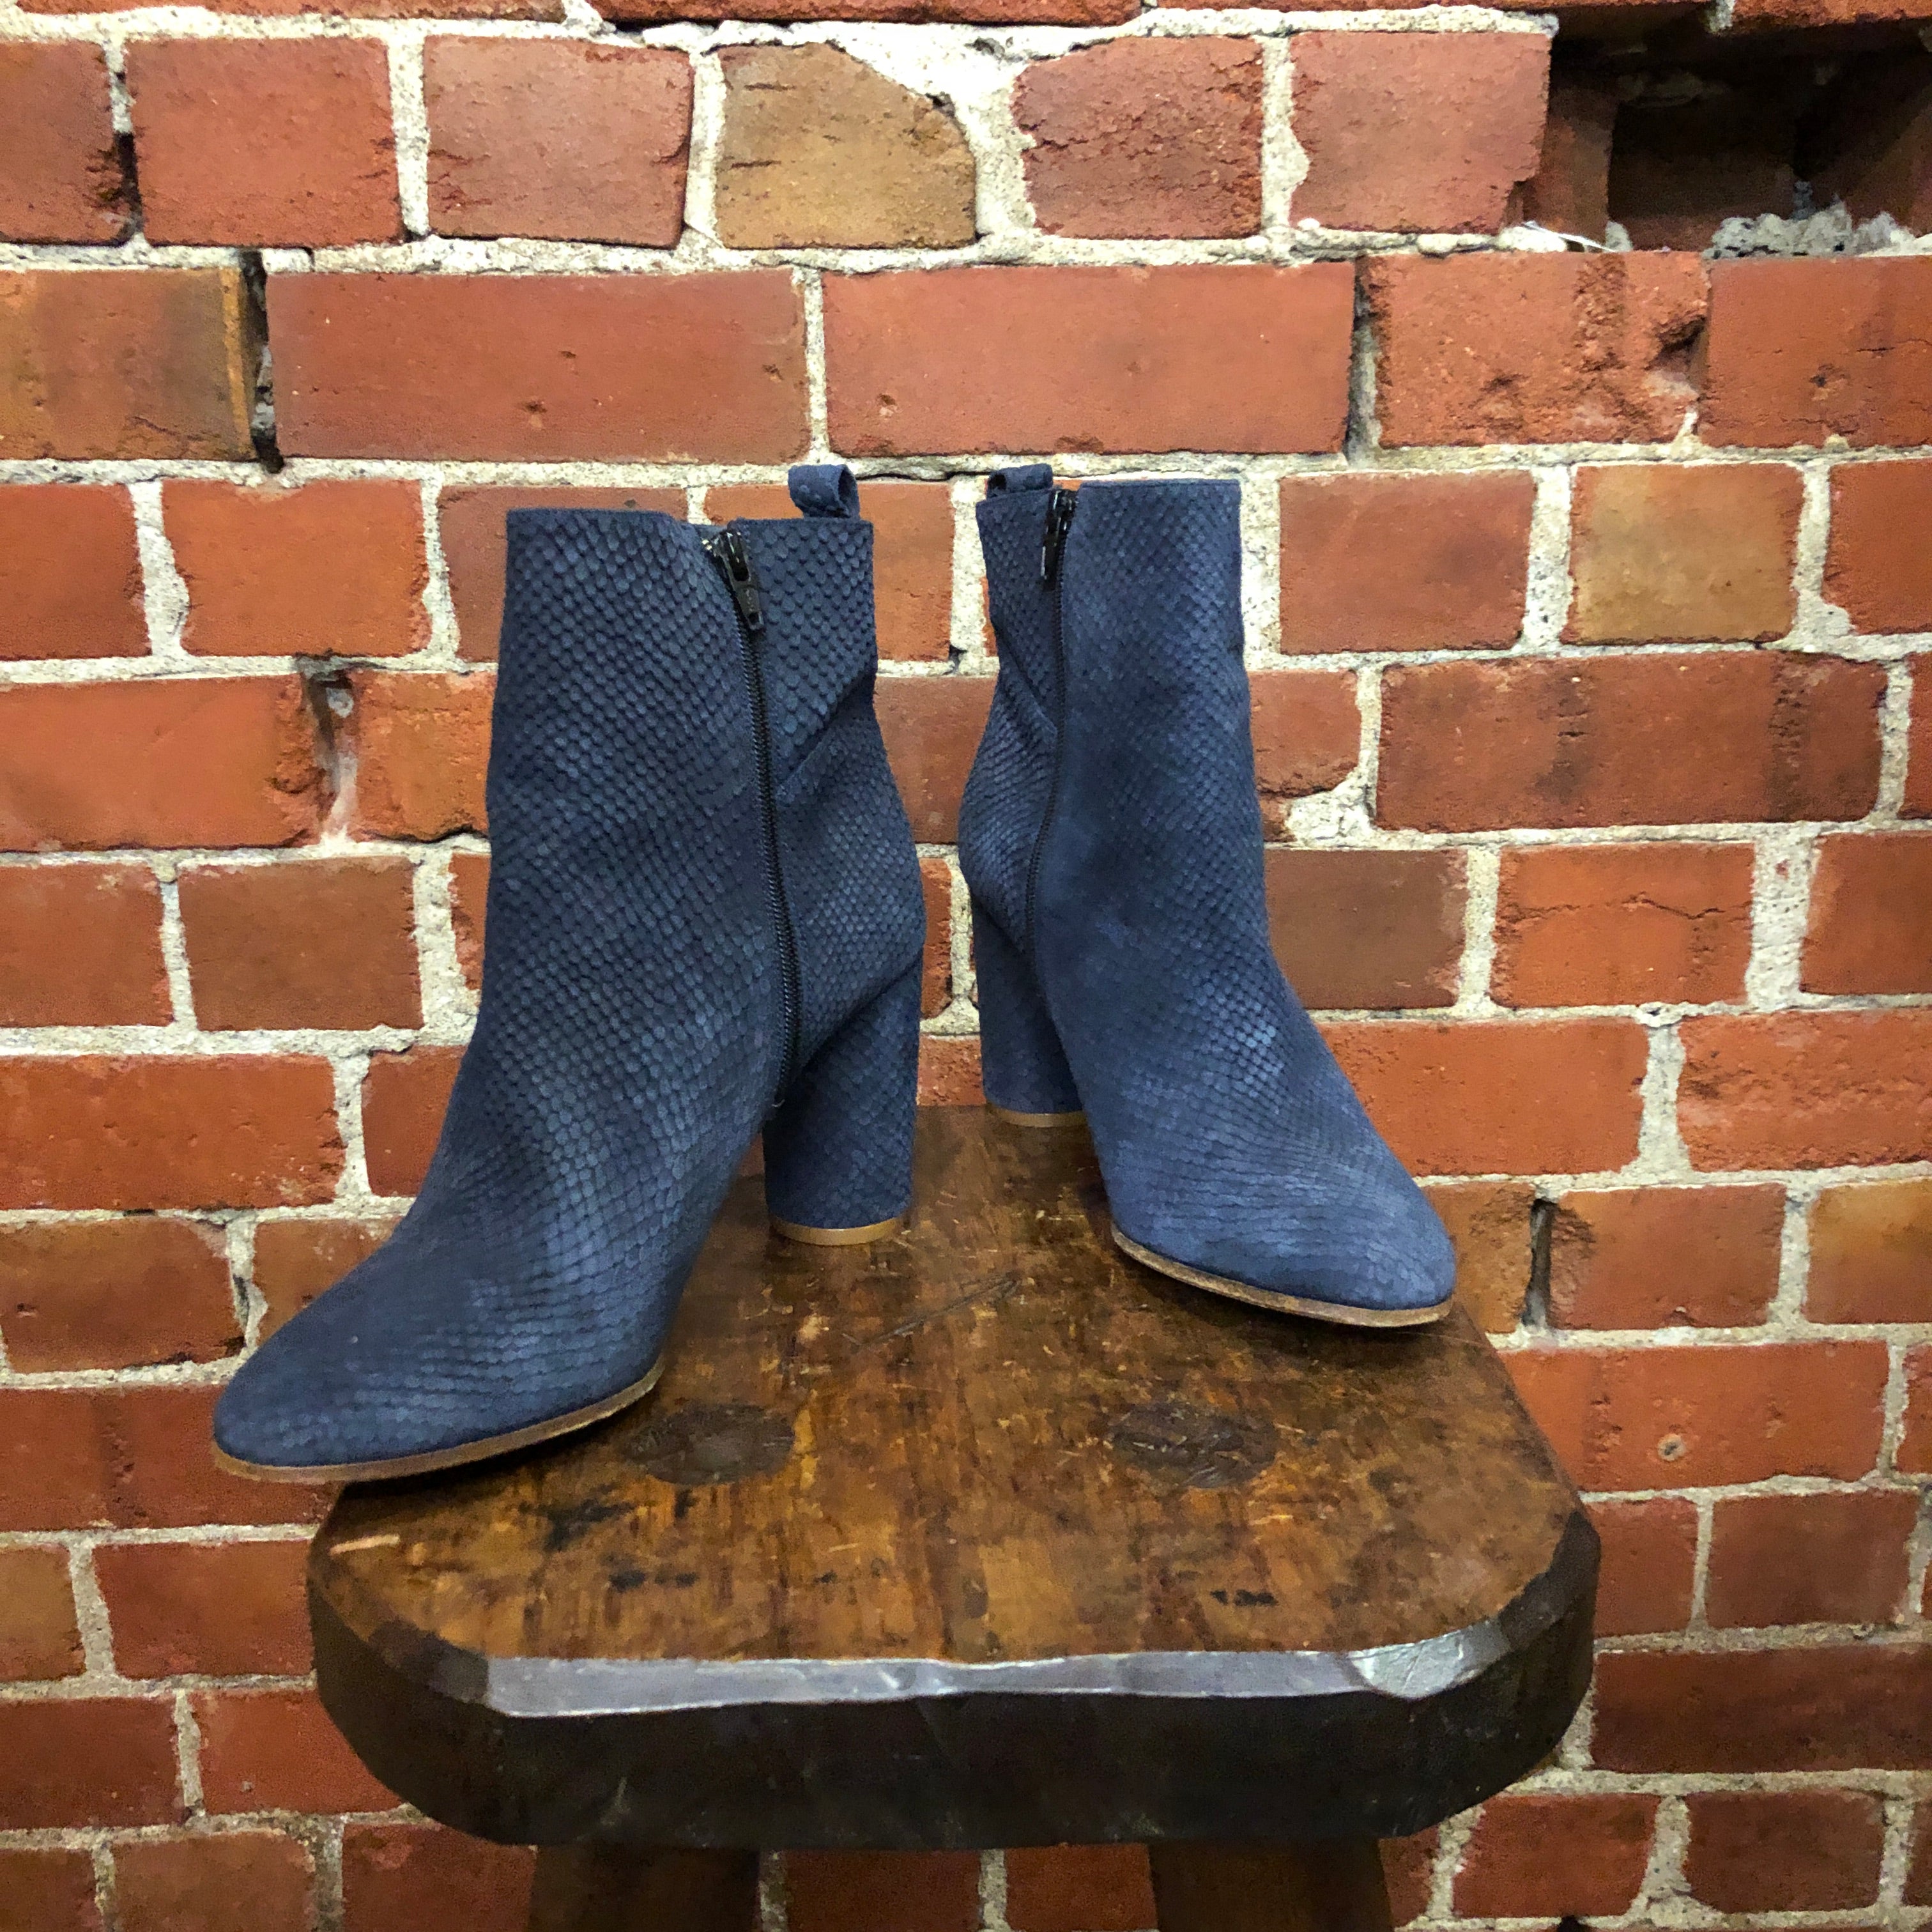 Blue snakeskin leather boots